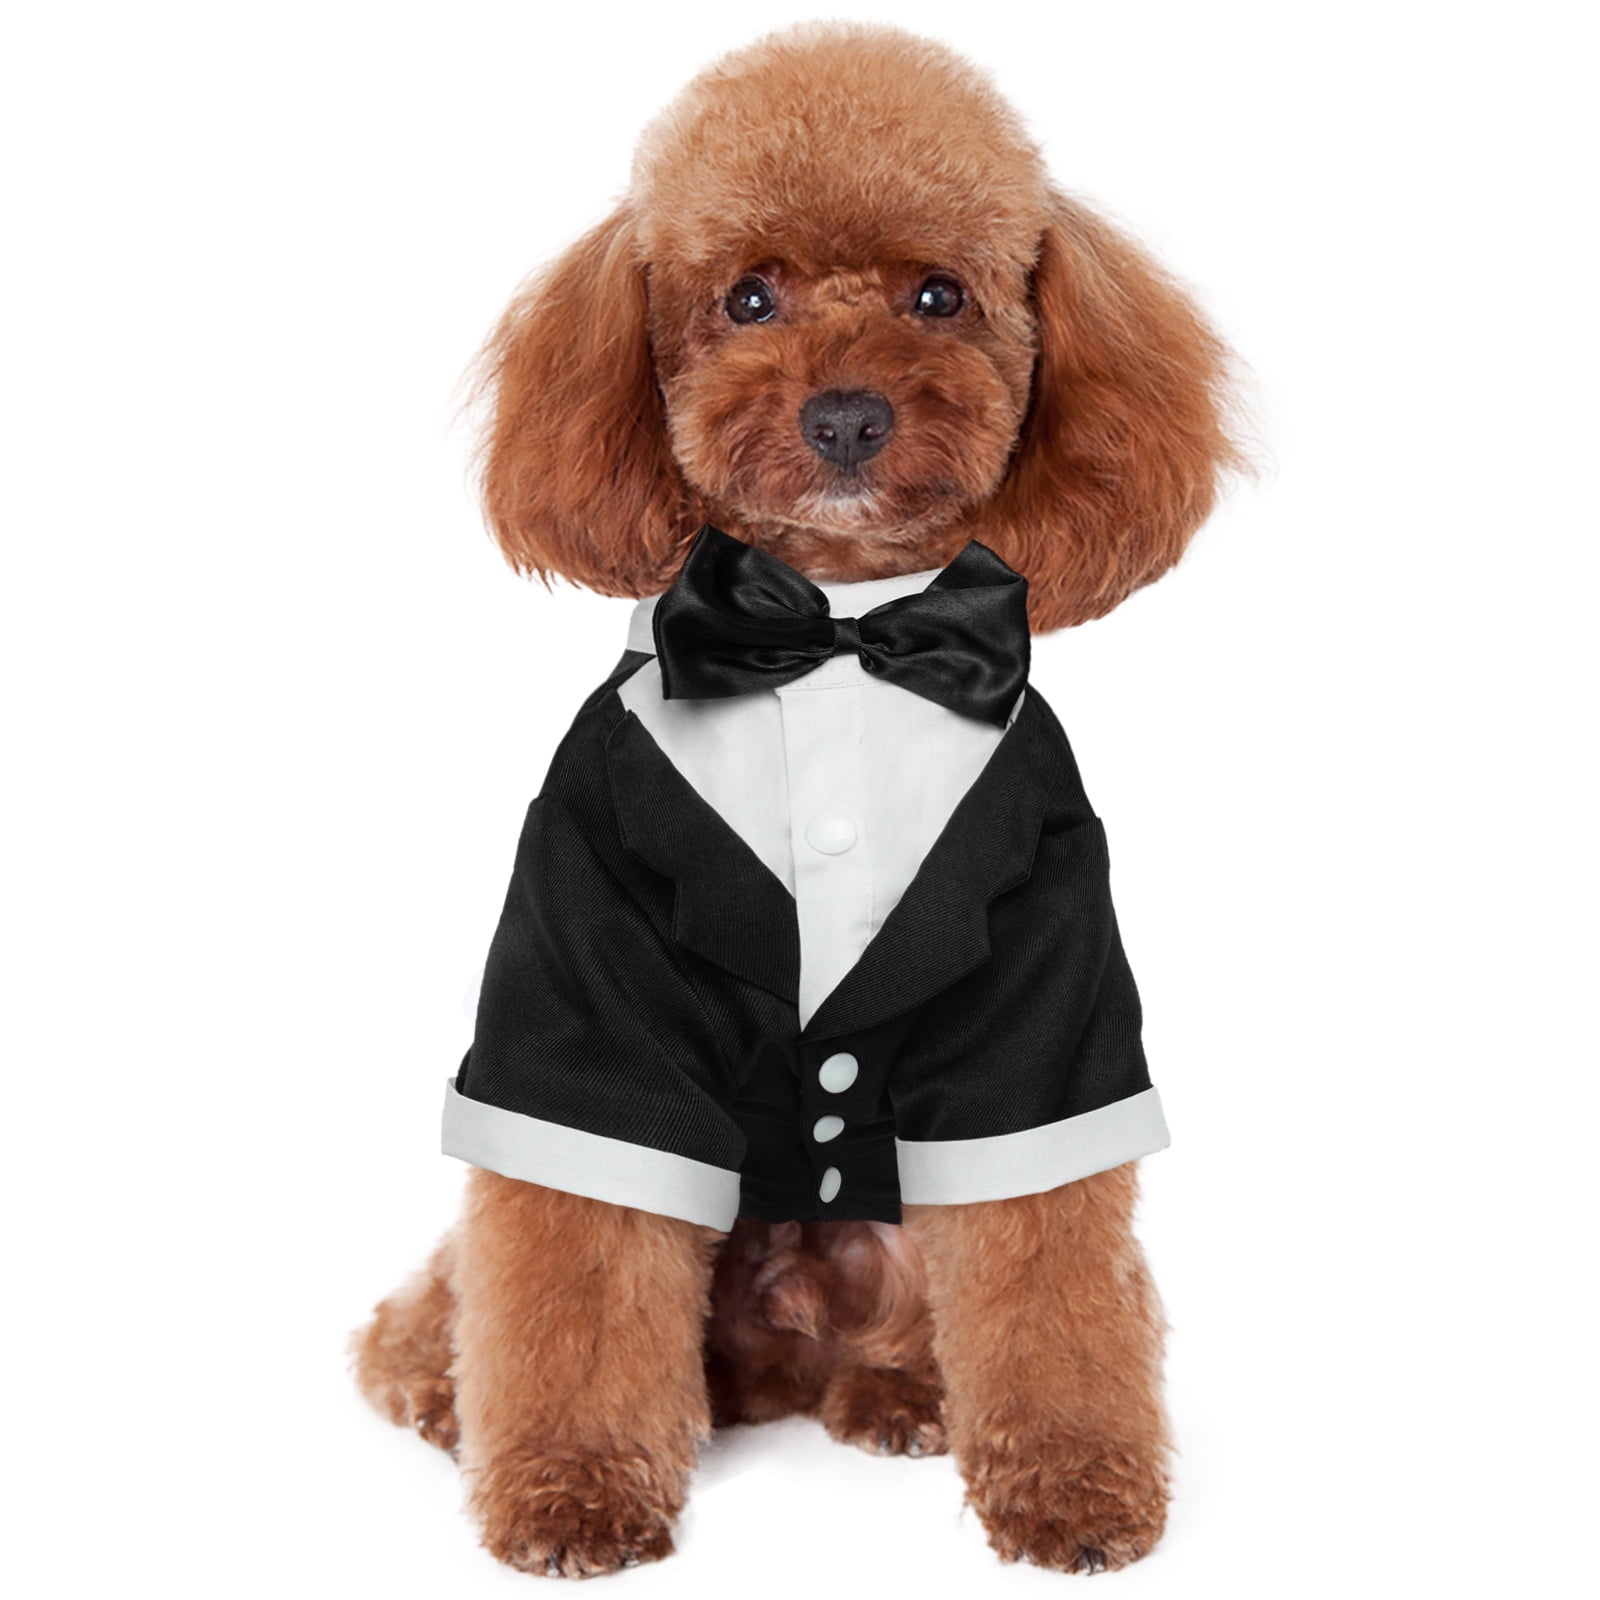 Segarty Pet Graduation Cap with Dog Bow Tie Tuxedo Neck Bow with Suit White Collar for Boy Dog Gown Outfits Dress Costumes Accessories Gift Dog Graduation Hat with Dog Ties for Small Dogs 